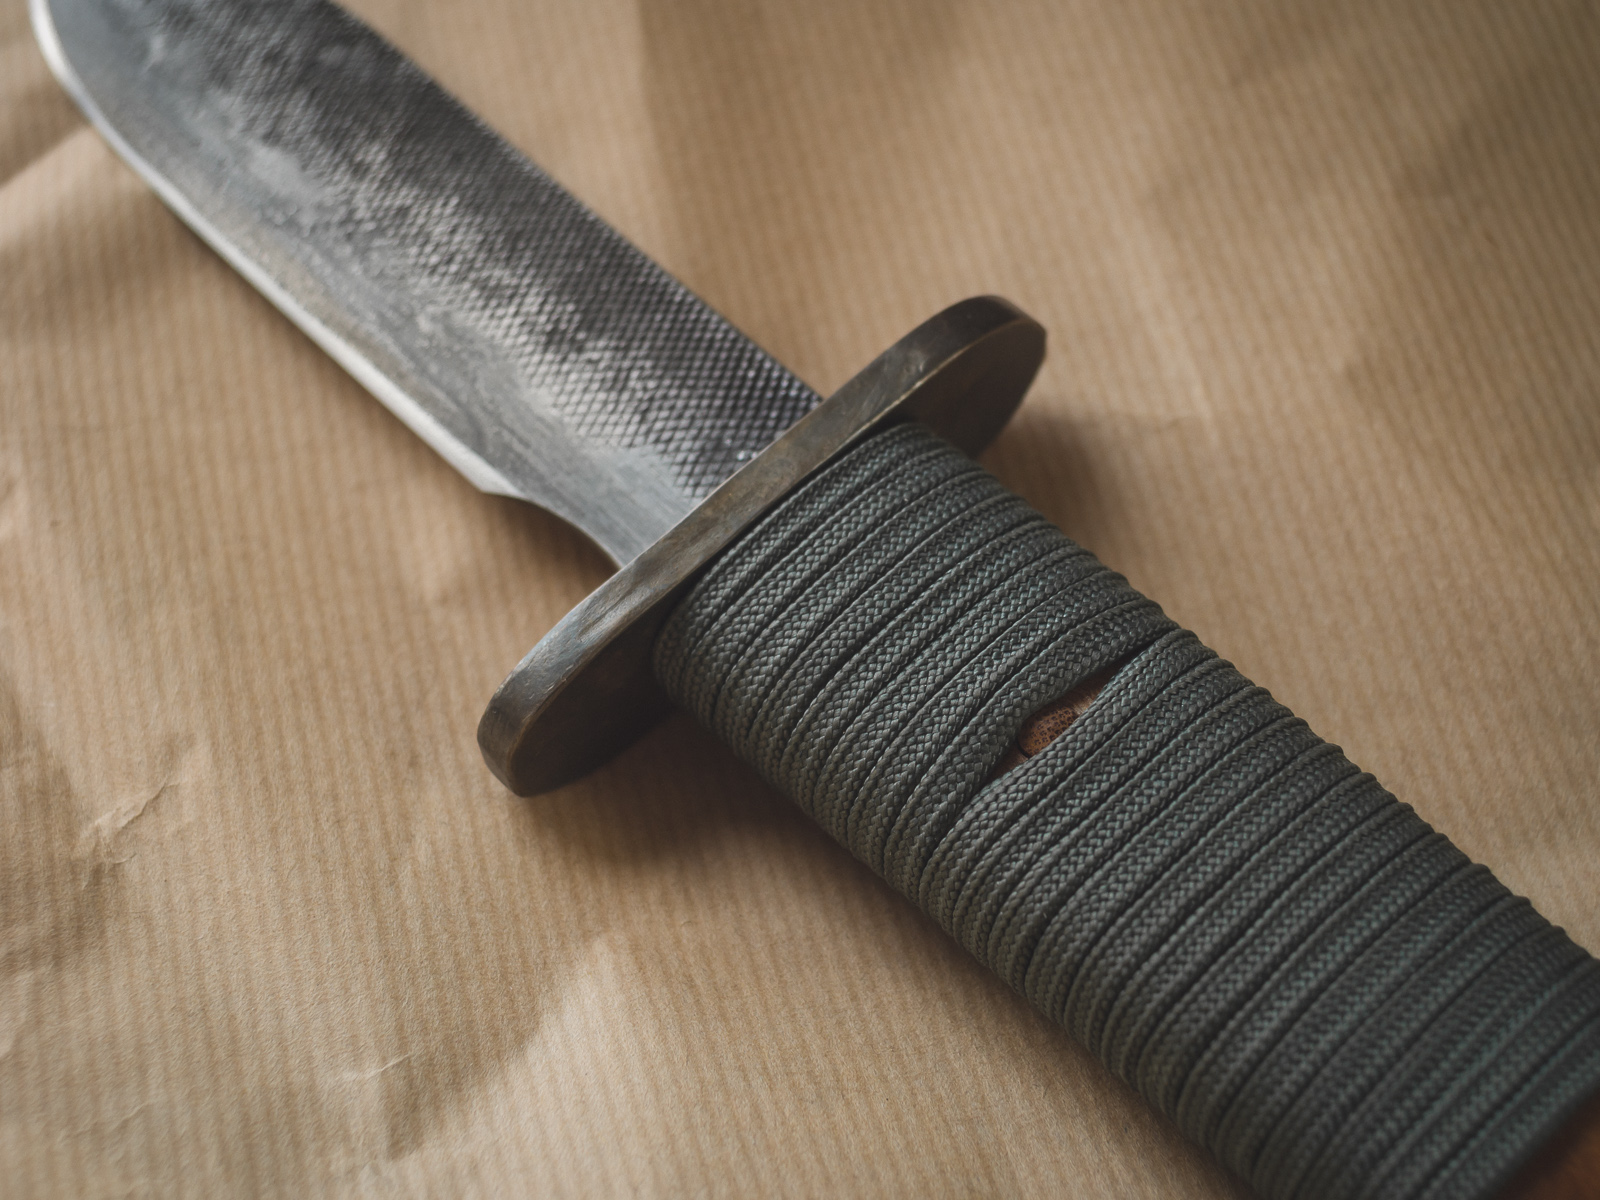 Island Blacksmith: Hand forged knives reclaimed from files and farm equipment.